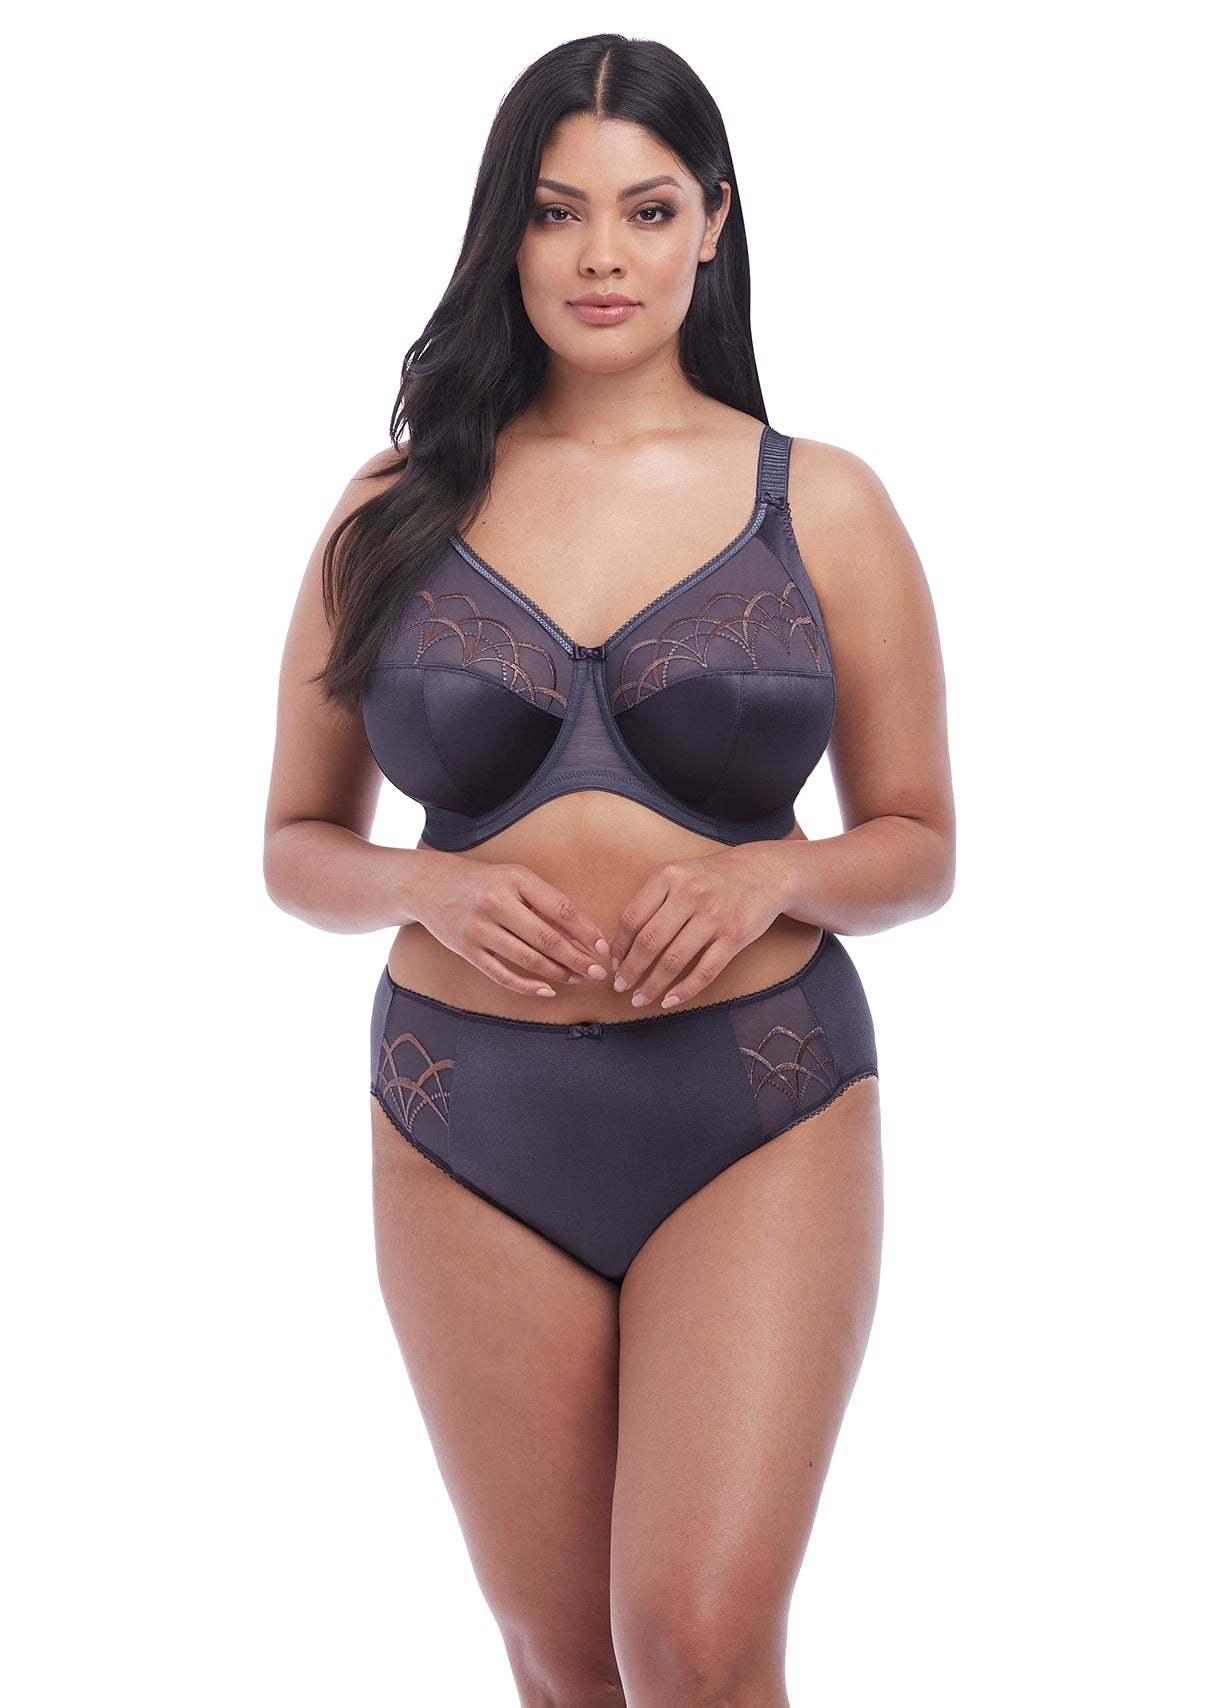 Elomi Cate Embroidered Full Cup Banded Underwire Bra (4030),44G